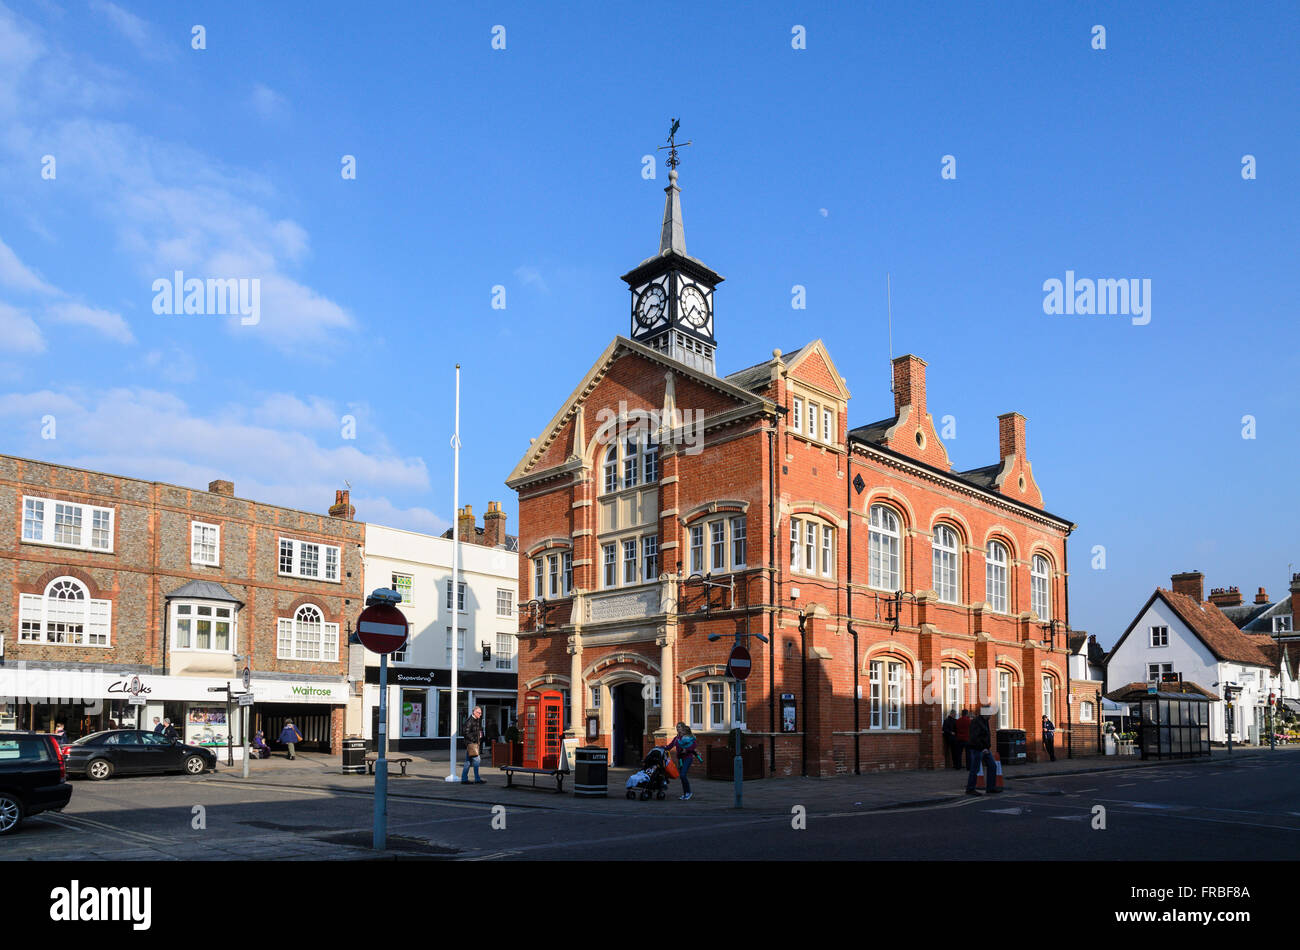 The Town Hall, home of Town Council, High Street, Thame, Oxfordshire, England, UK. Stock Photo